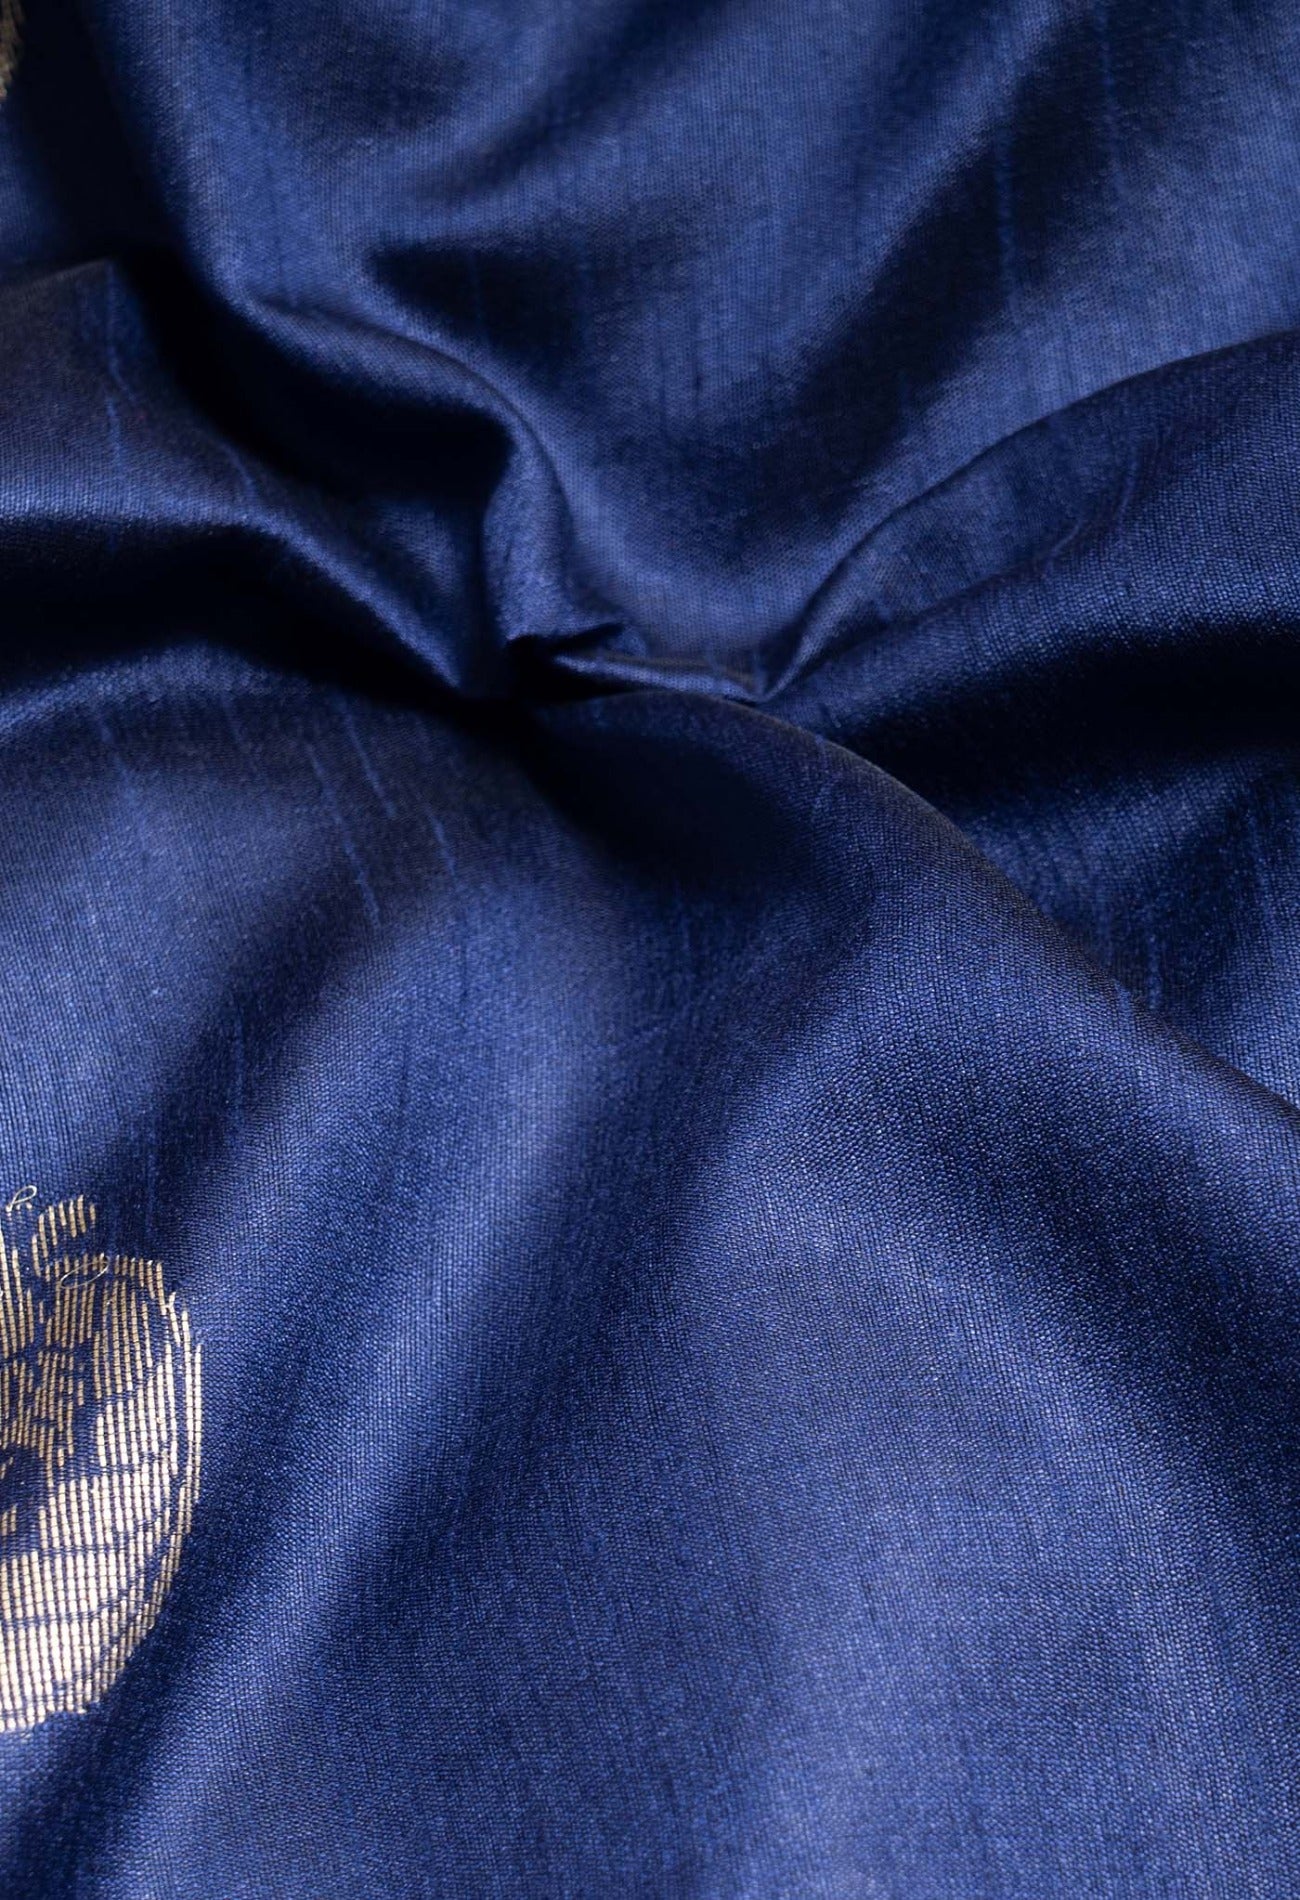 Online Shopping for Navy Blue  Dupion  Silk Saree with Weaving from West Bengal at Unnatisilks.com India
